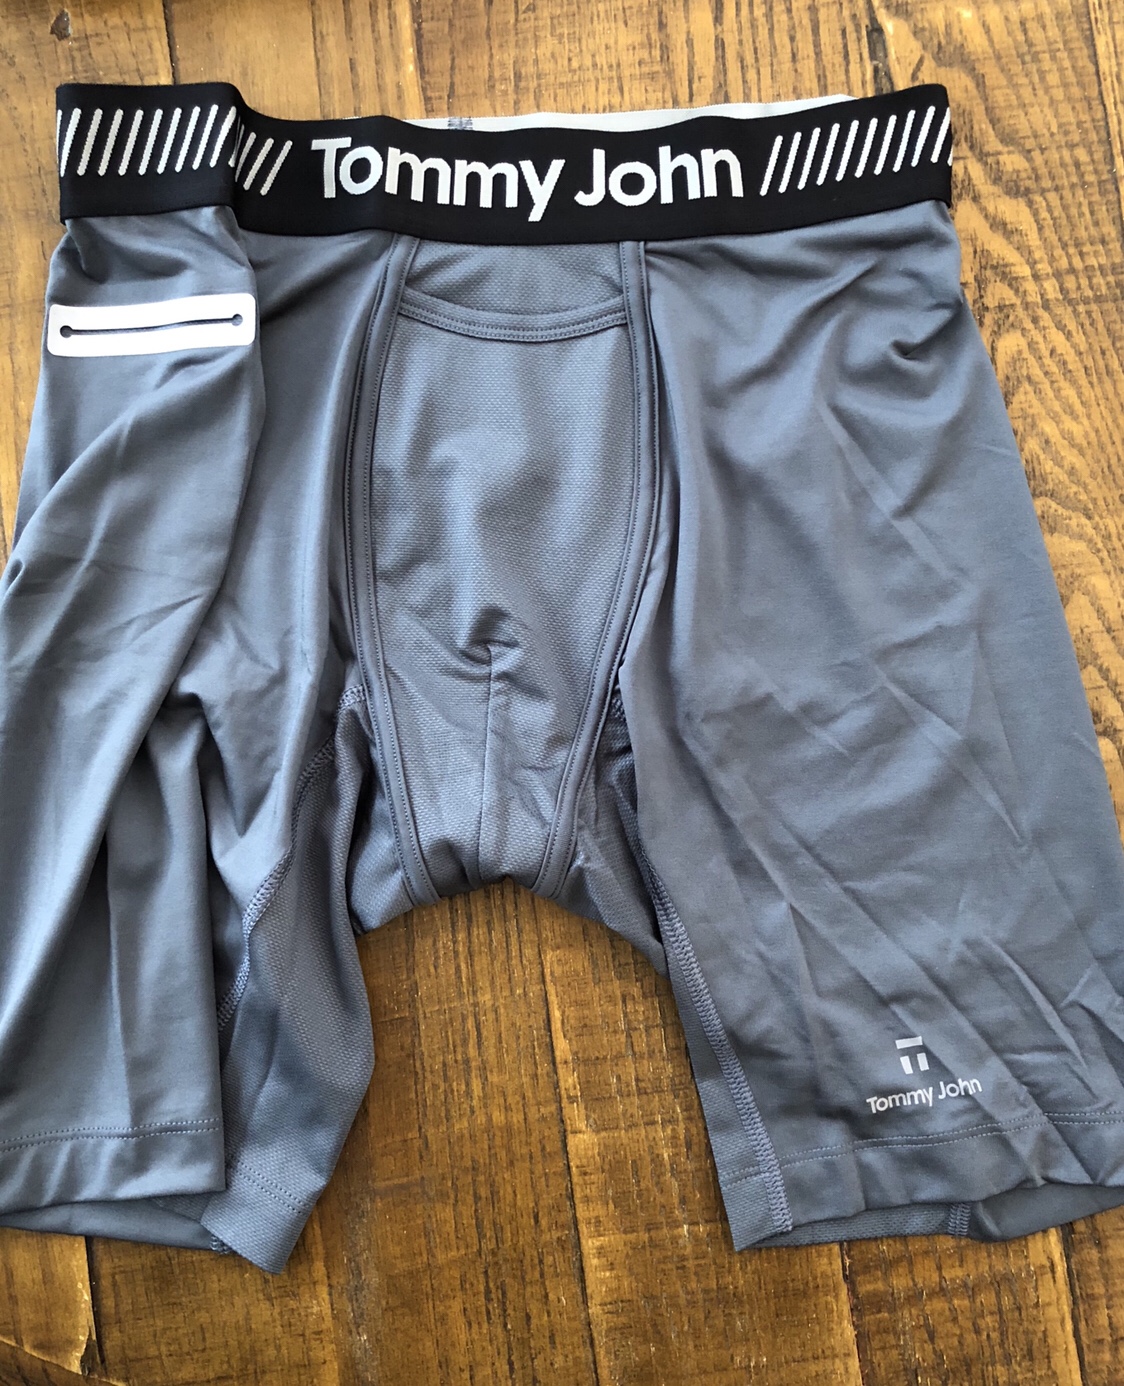 tommy john 360 sport 2.0 review